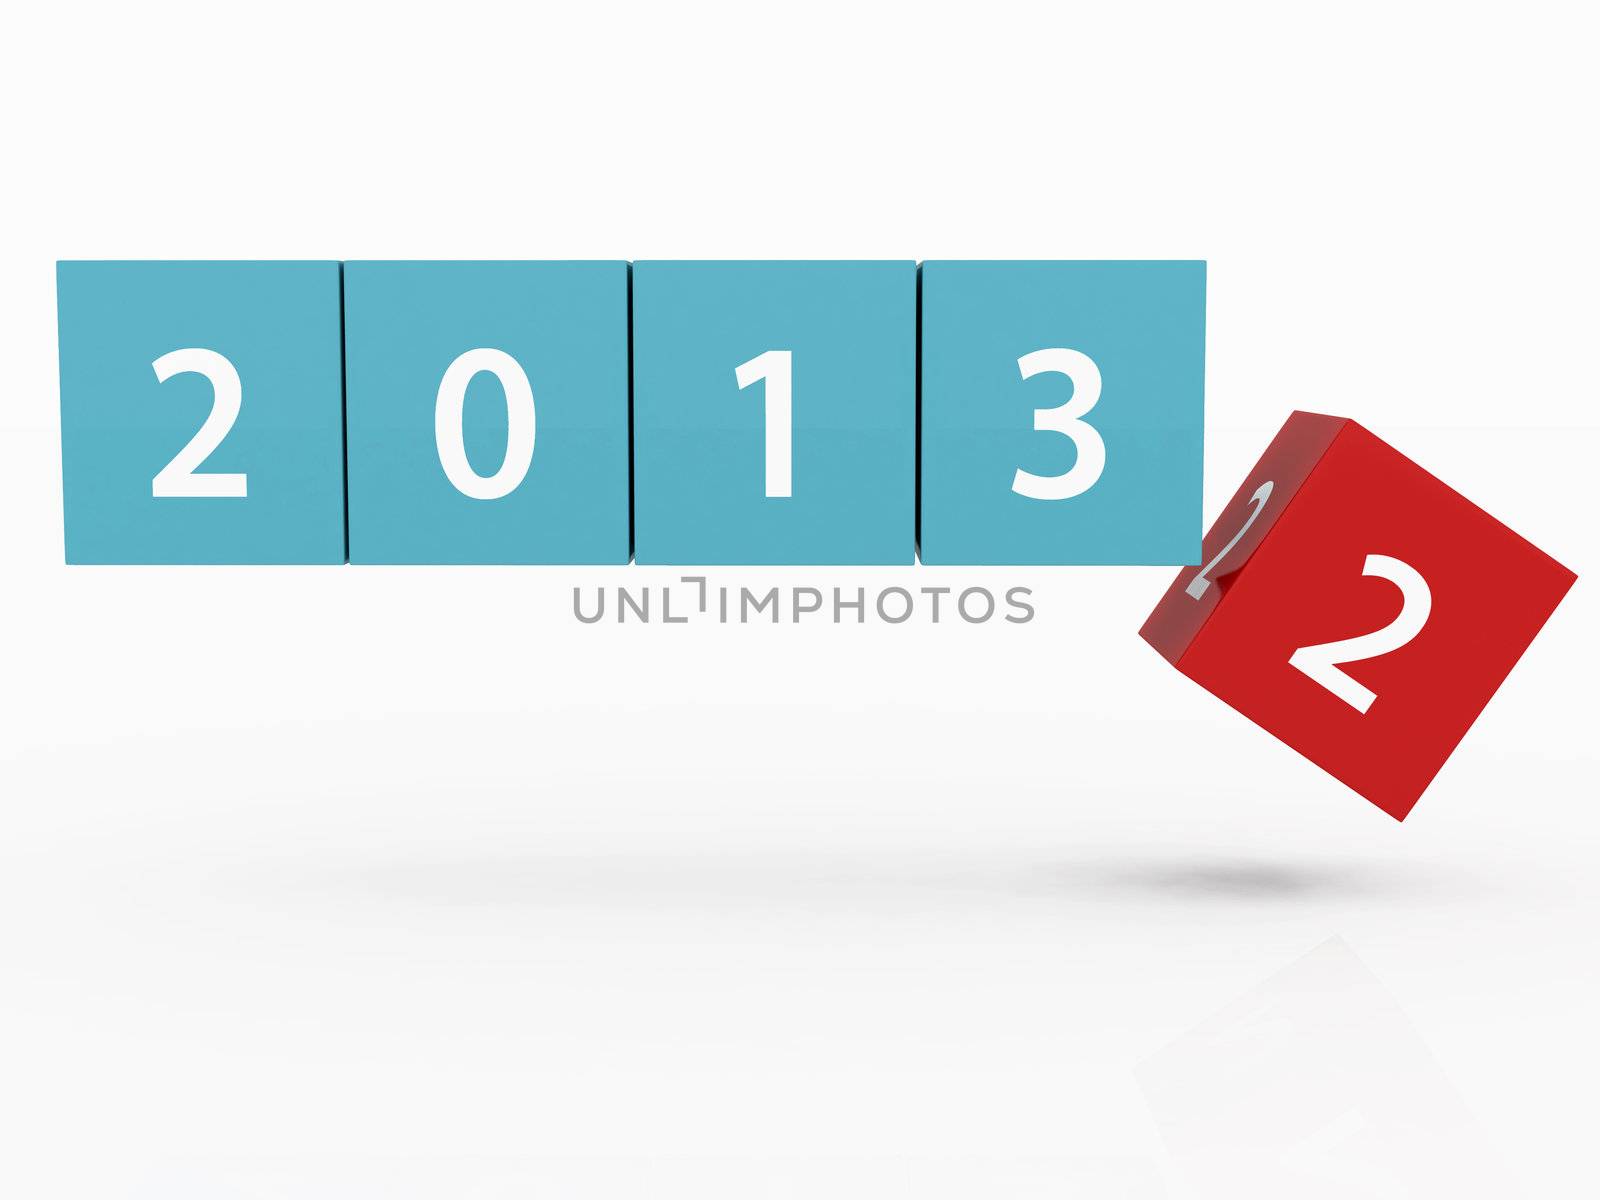 New year 2013 concept, red and blue three dimensional cubes / blocks on white background.